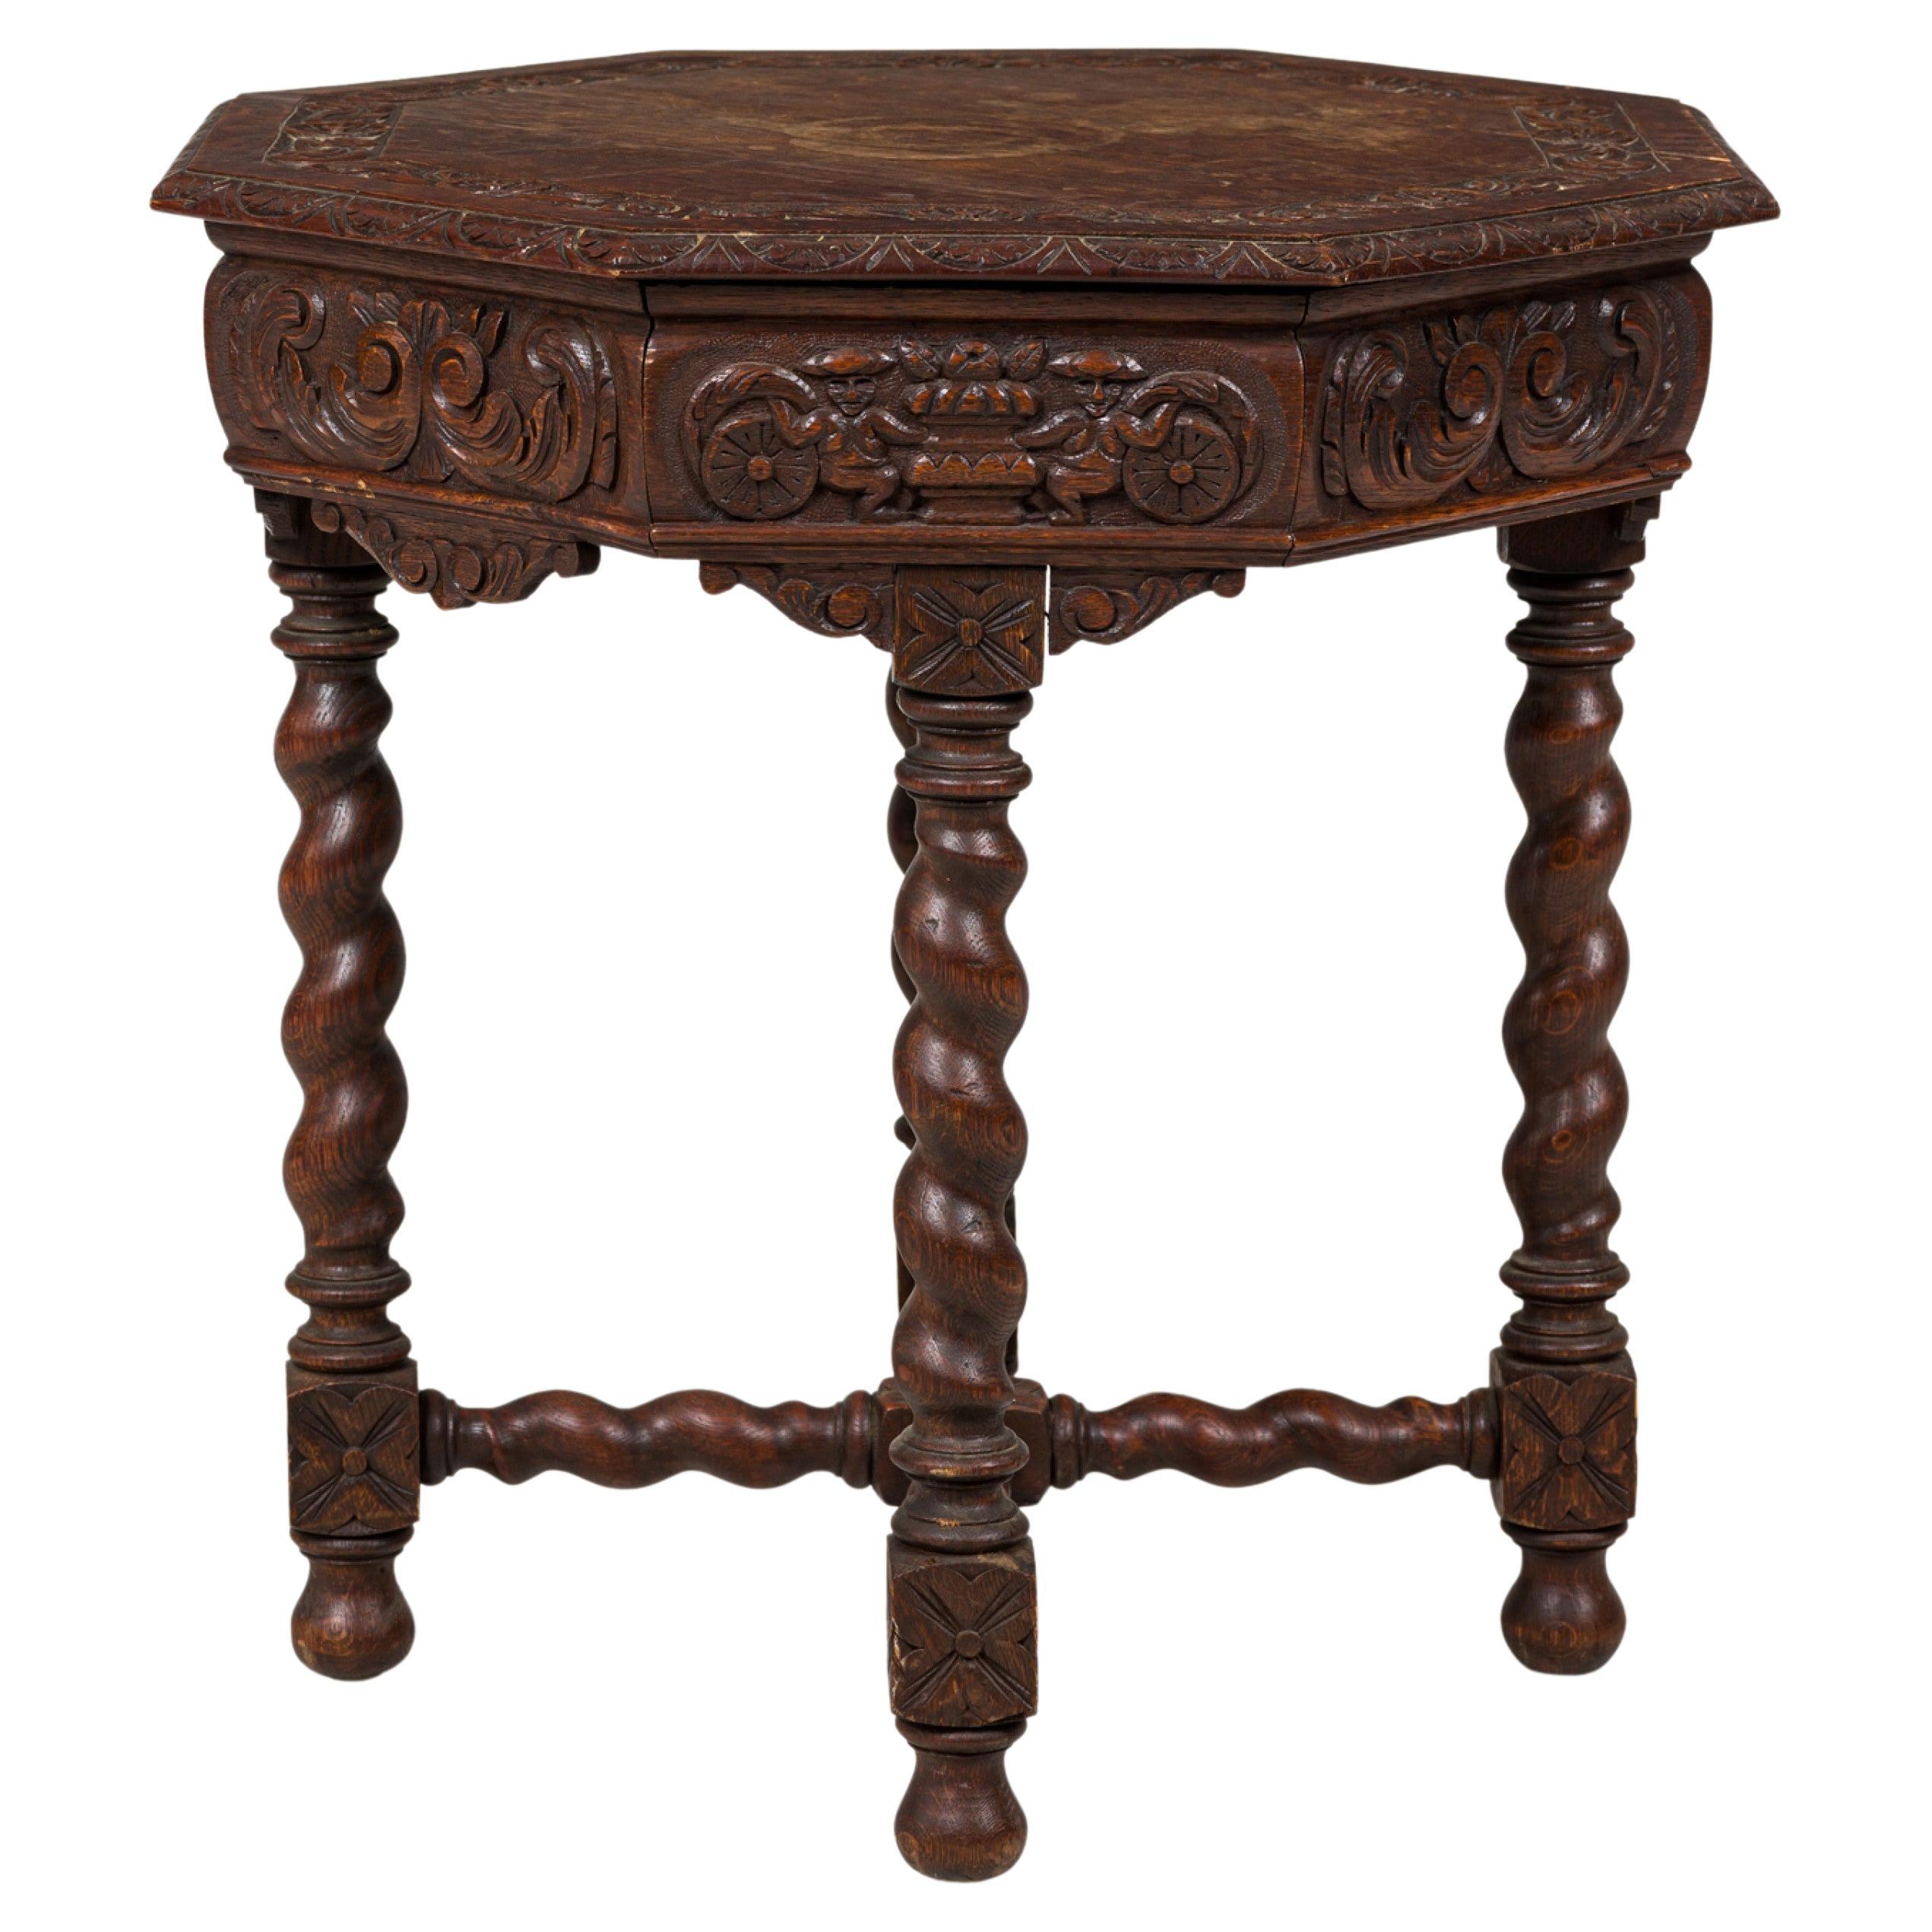 English Jacobean-Style Carved Spiral Turned Leg Octagonal Occasional/Side Table For Sale